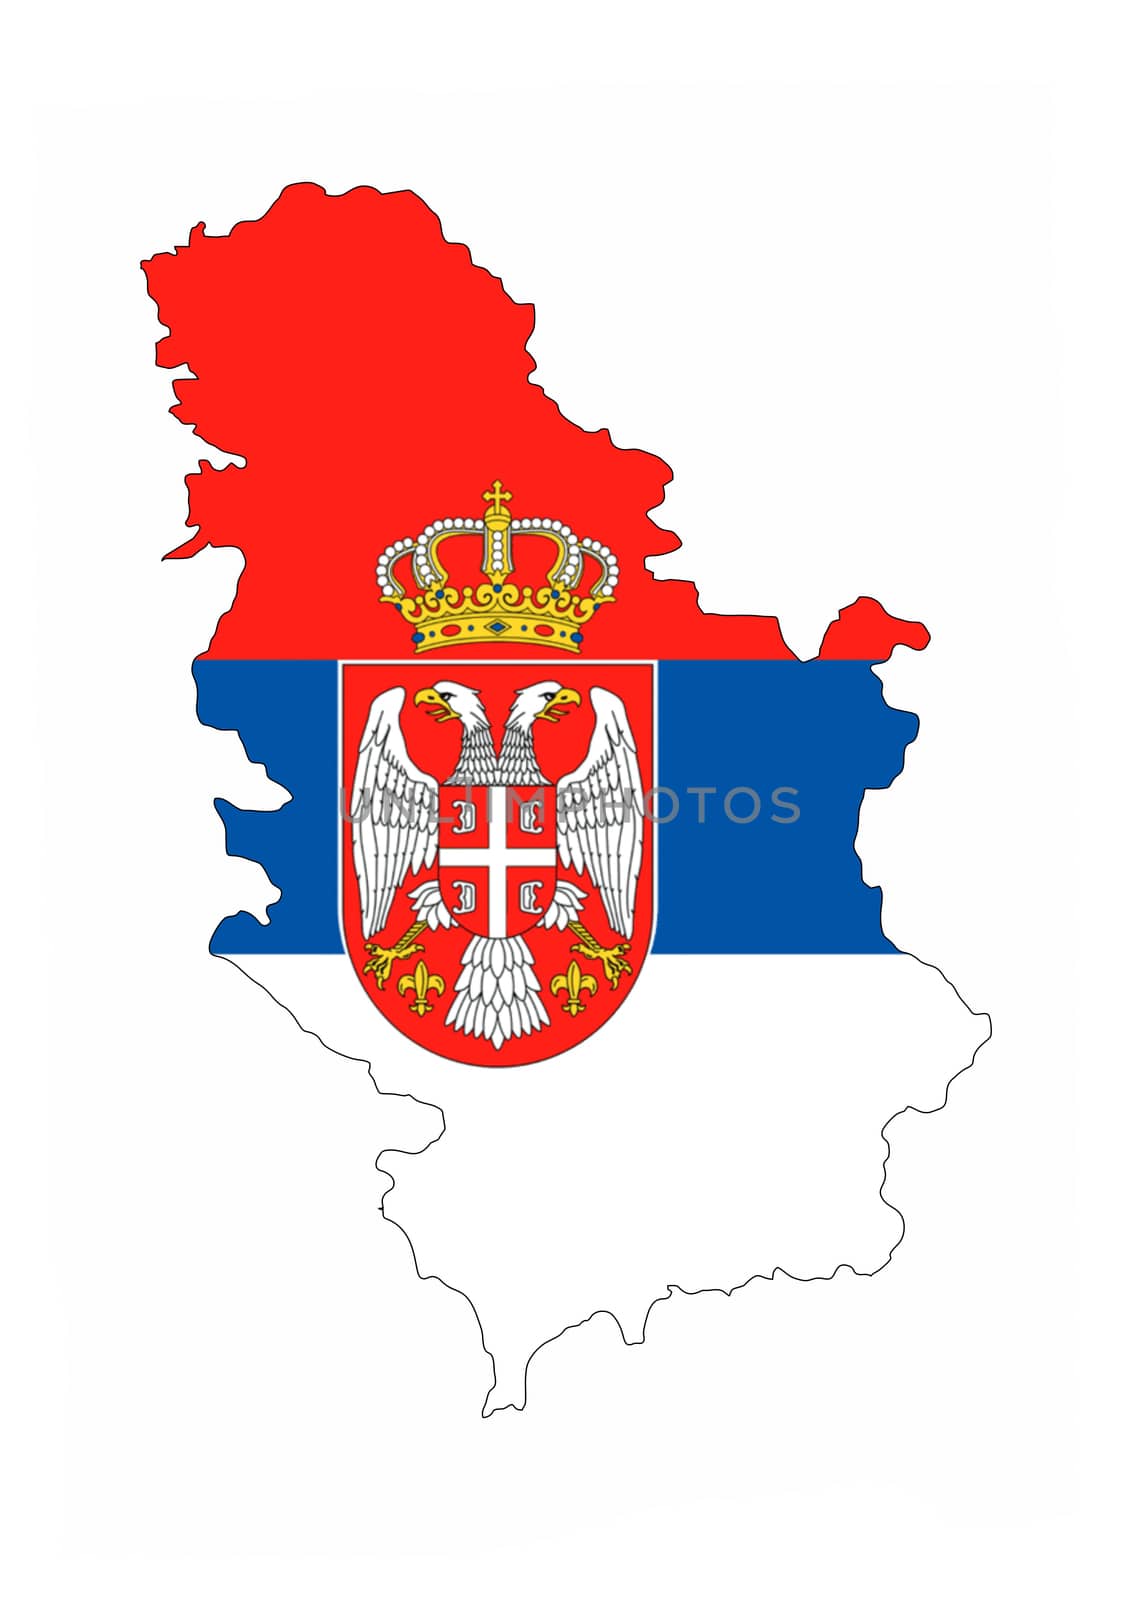 serbia country flag map shape national symbol